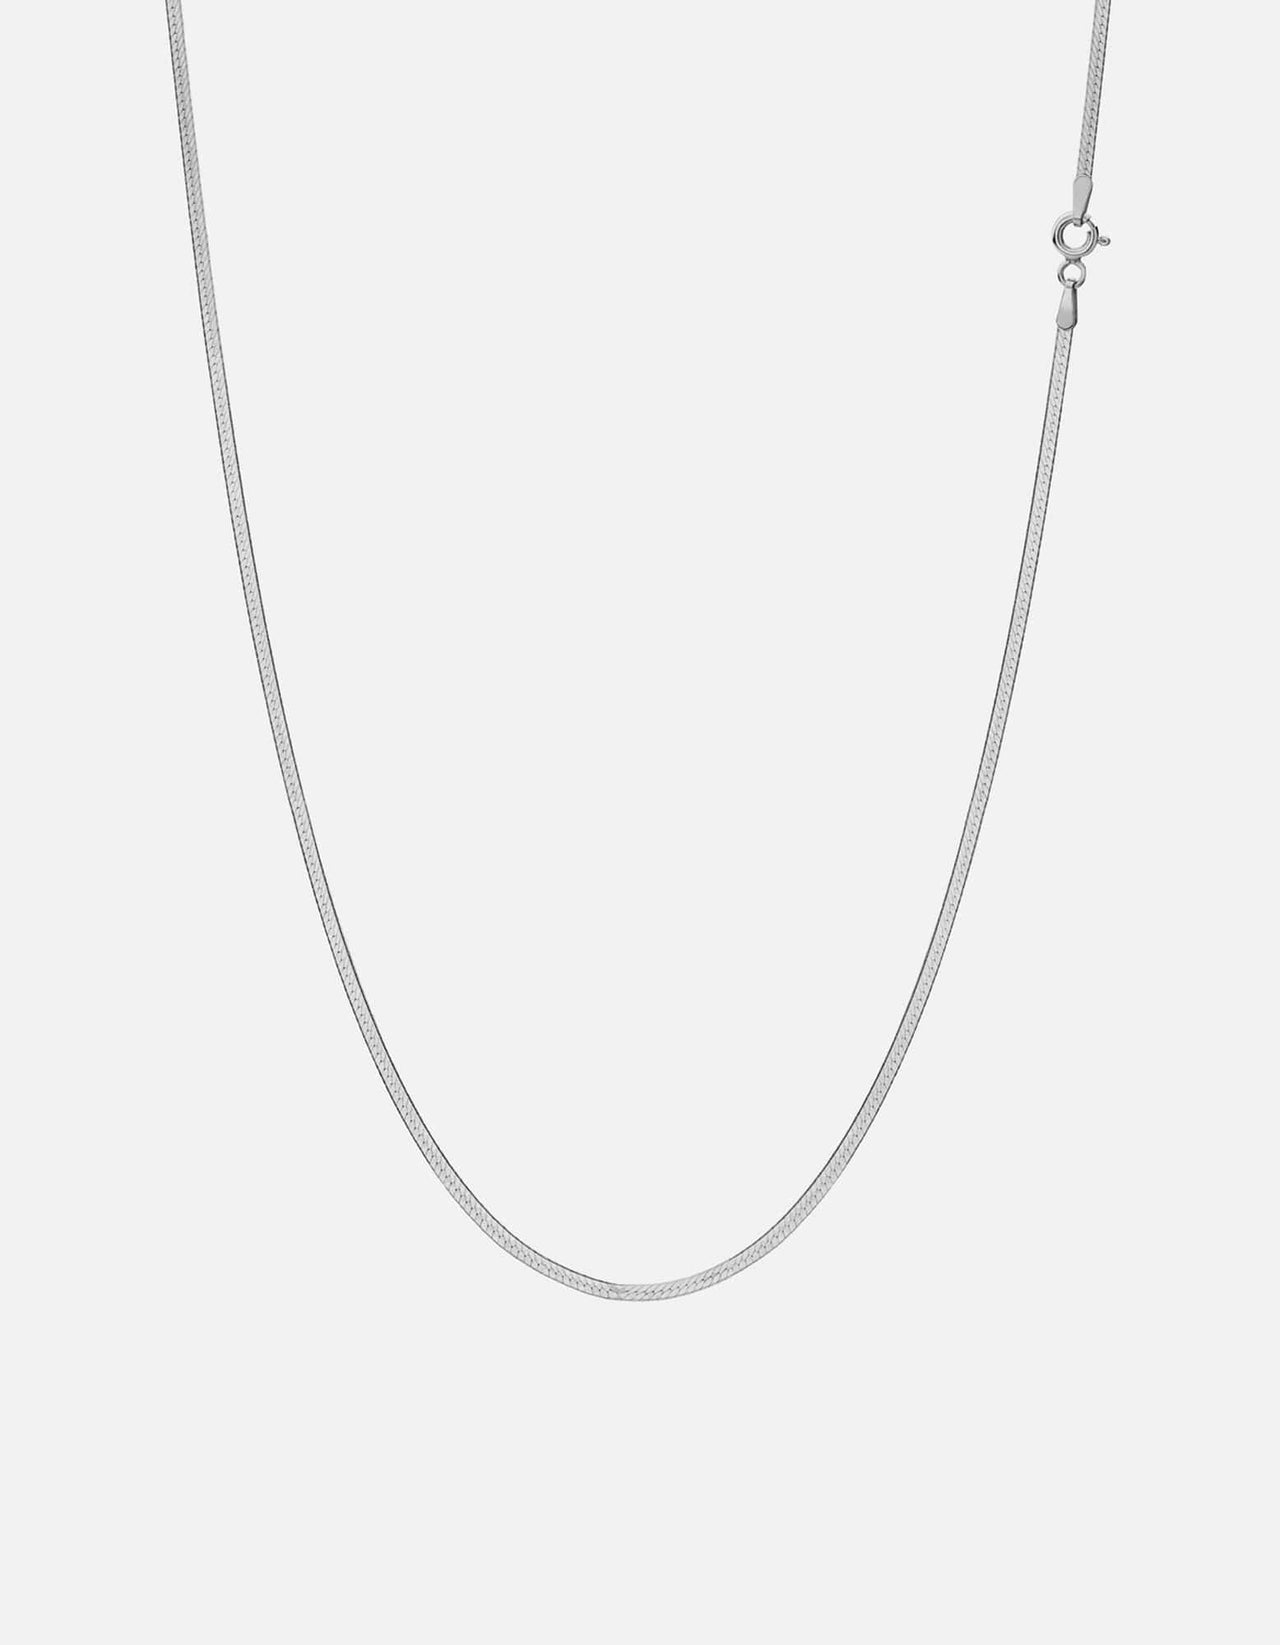 Amazon.com: JOSCO 5.7mm Herringbone .925 Sterling Silver Necklace, Italian  Chain. 16,18,20,22,24 inches (16 Inches): Clothing, Shoes & Jewelry